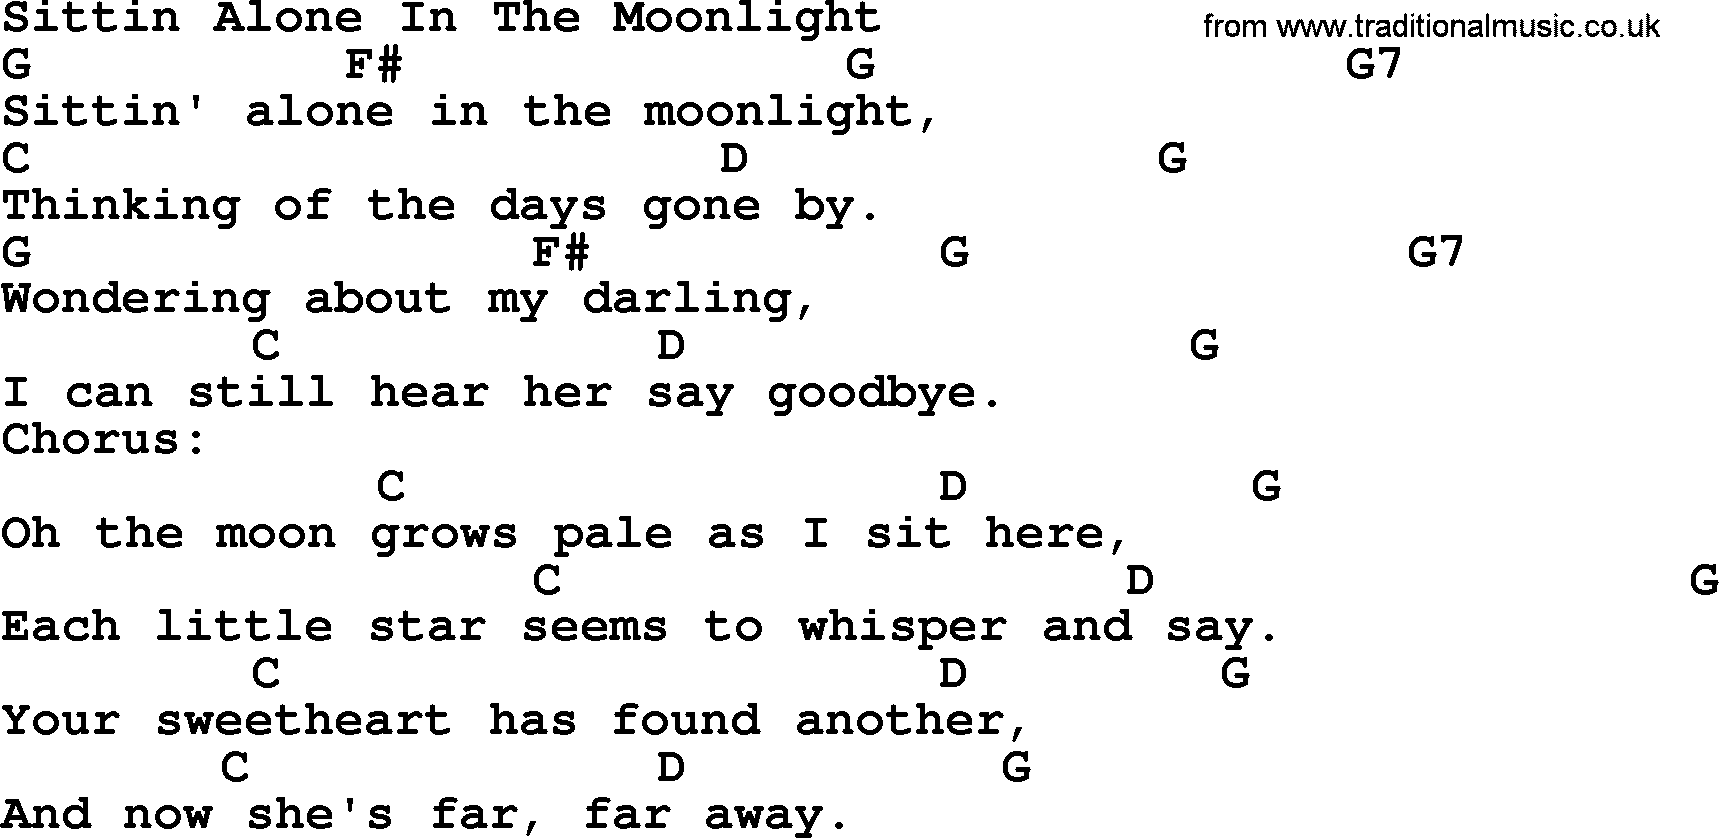 Bluegrass song: Sittin Alone In The Moonlight, lyrics and chords